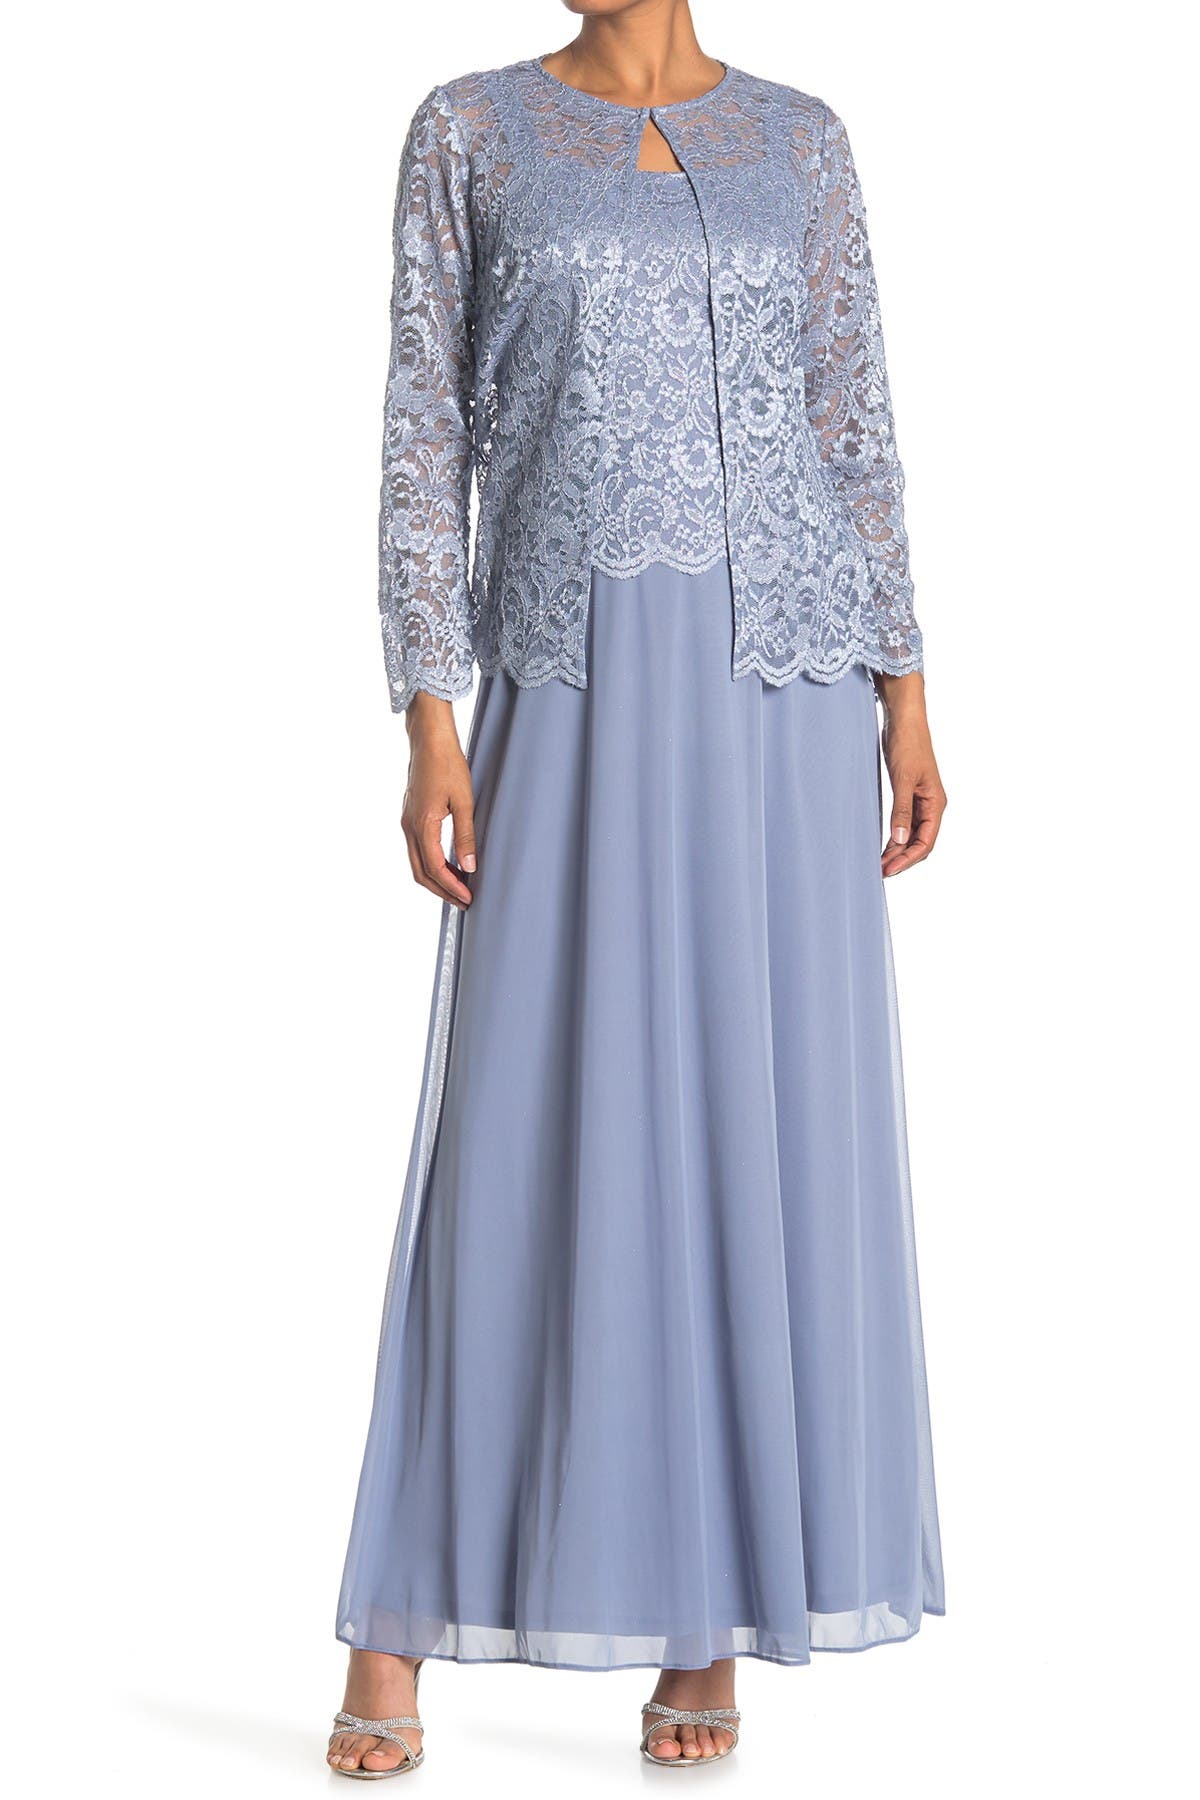 1920s Day Dresses, Non-Flapper Daytime Outfits Marina Lace Jacket  Gown in Lt Blue at Nordstrom Rack Size 14 $84.97 AT vintagedancer.com